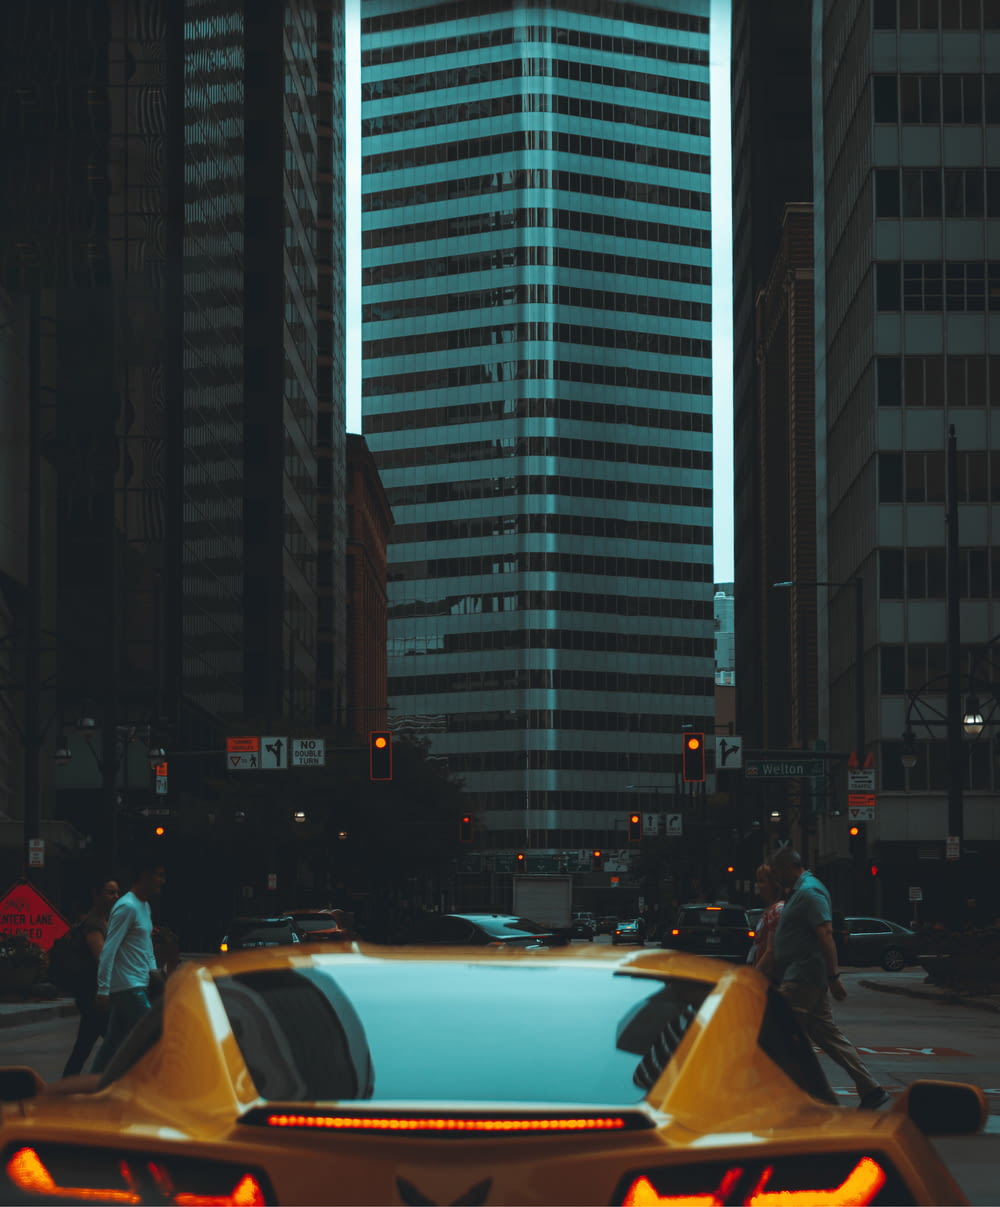 a yellow taxi cab in a city